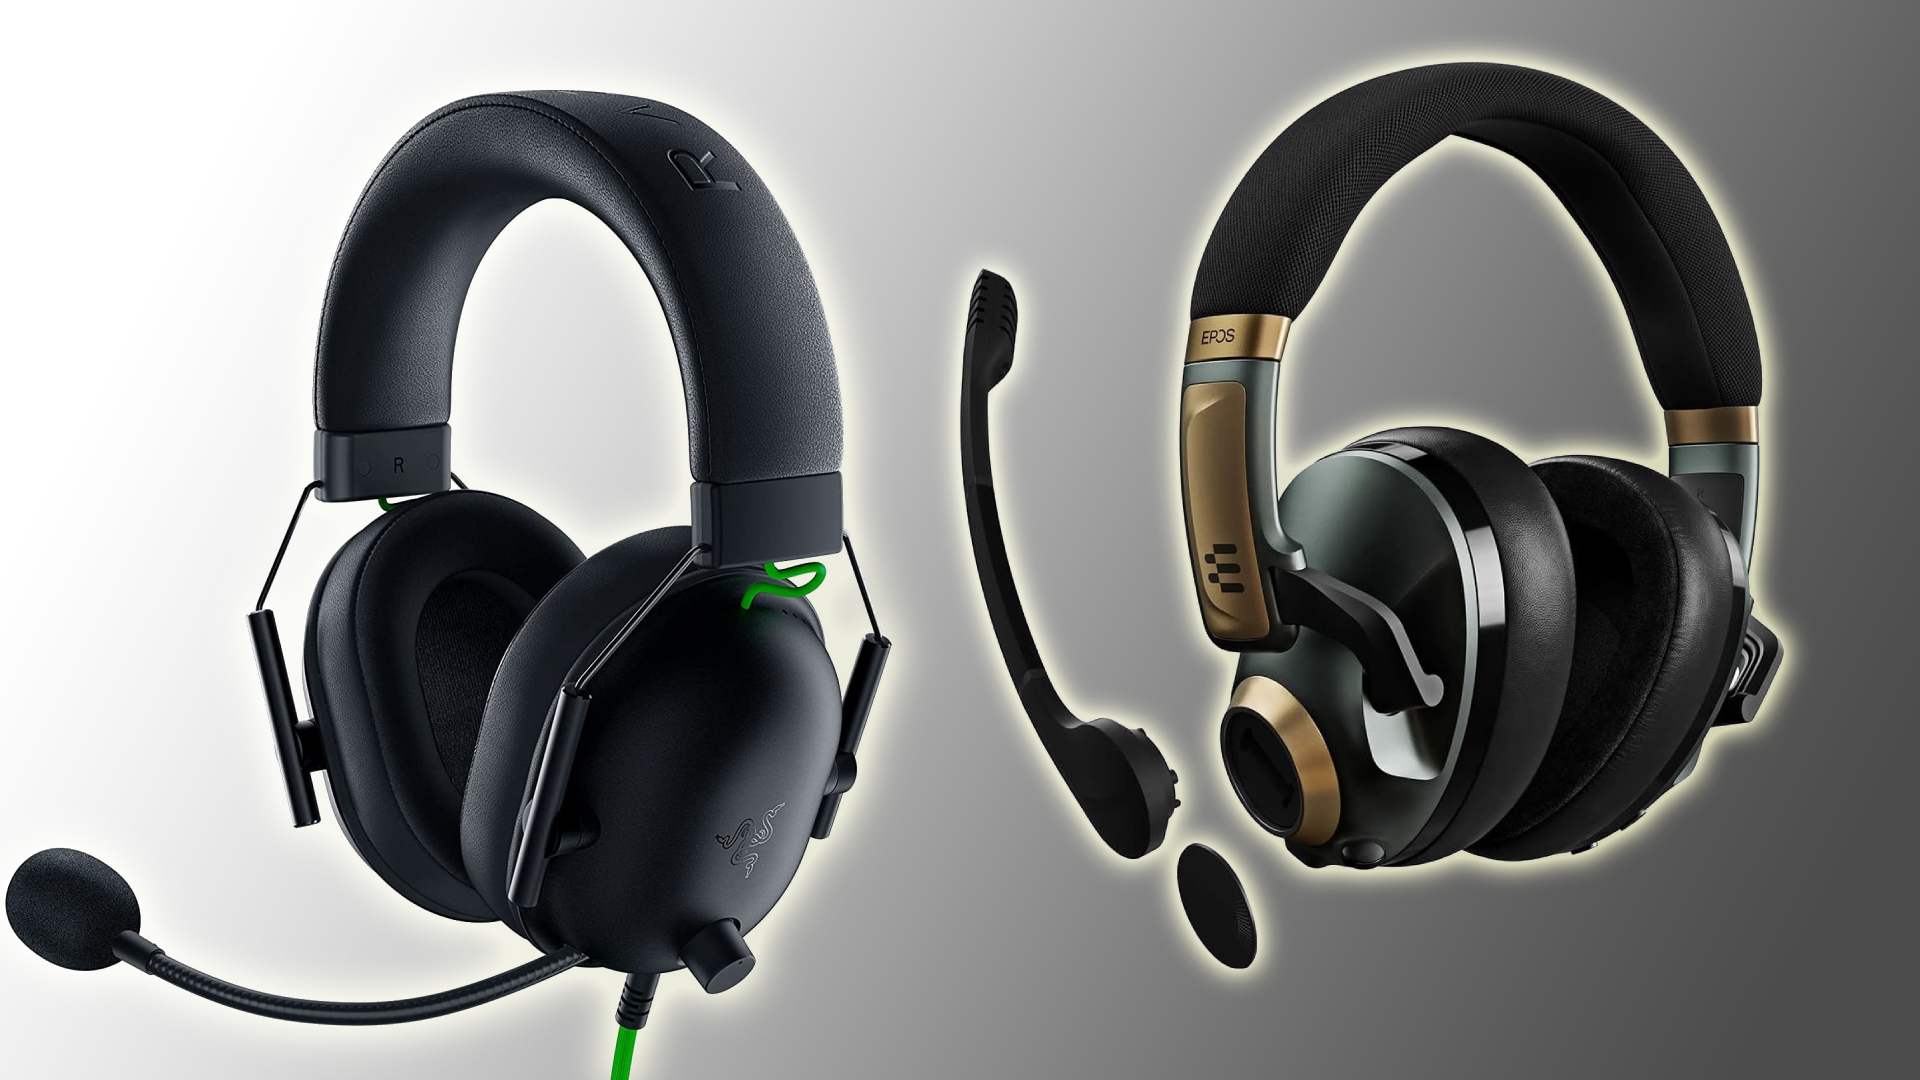 Wired vs wireless gaming headset: which should you get?